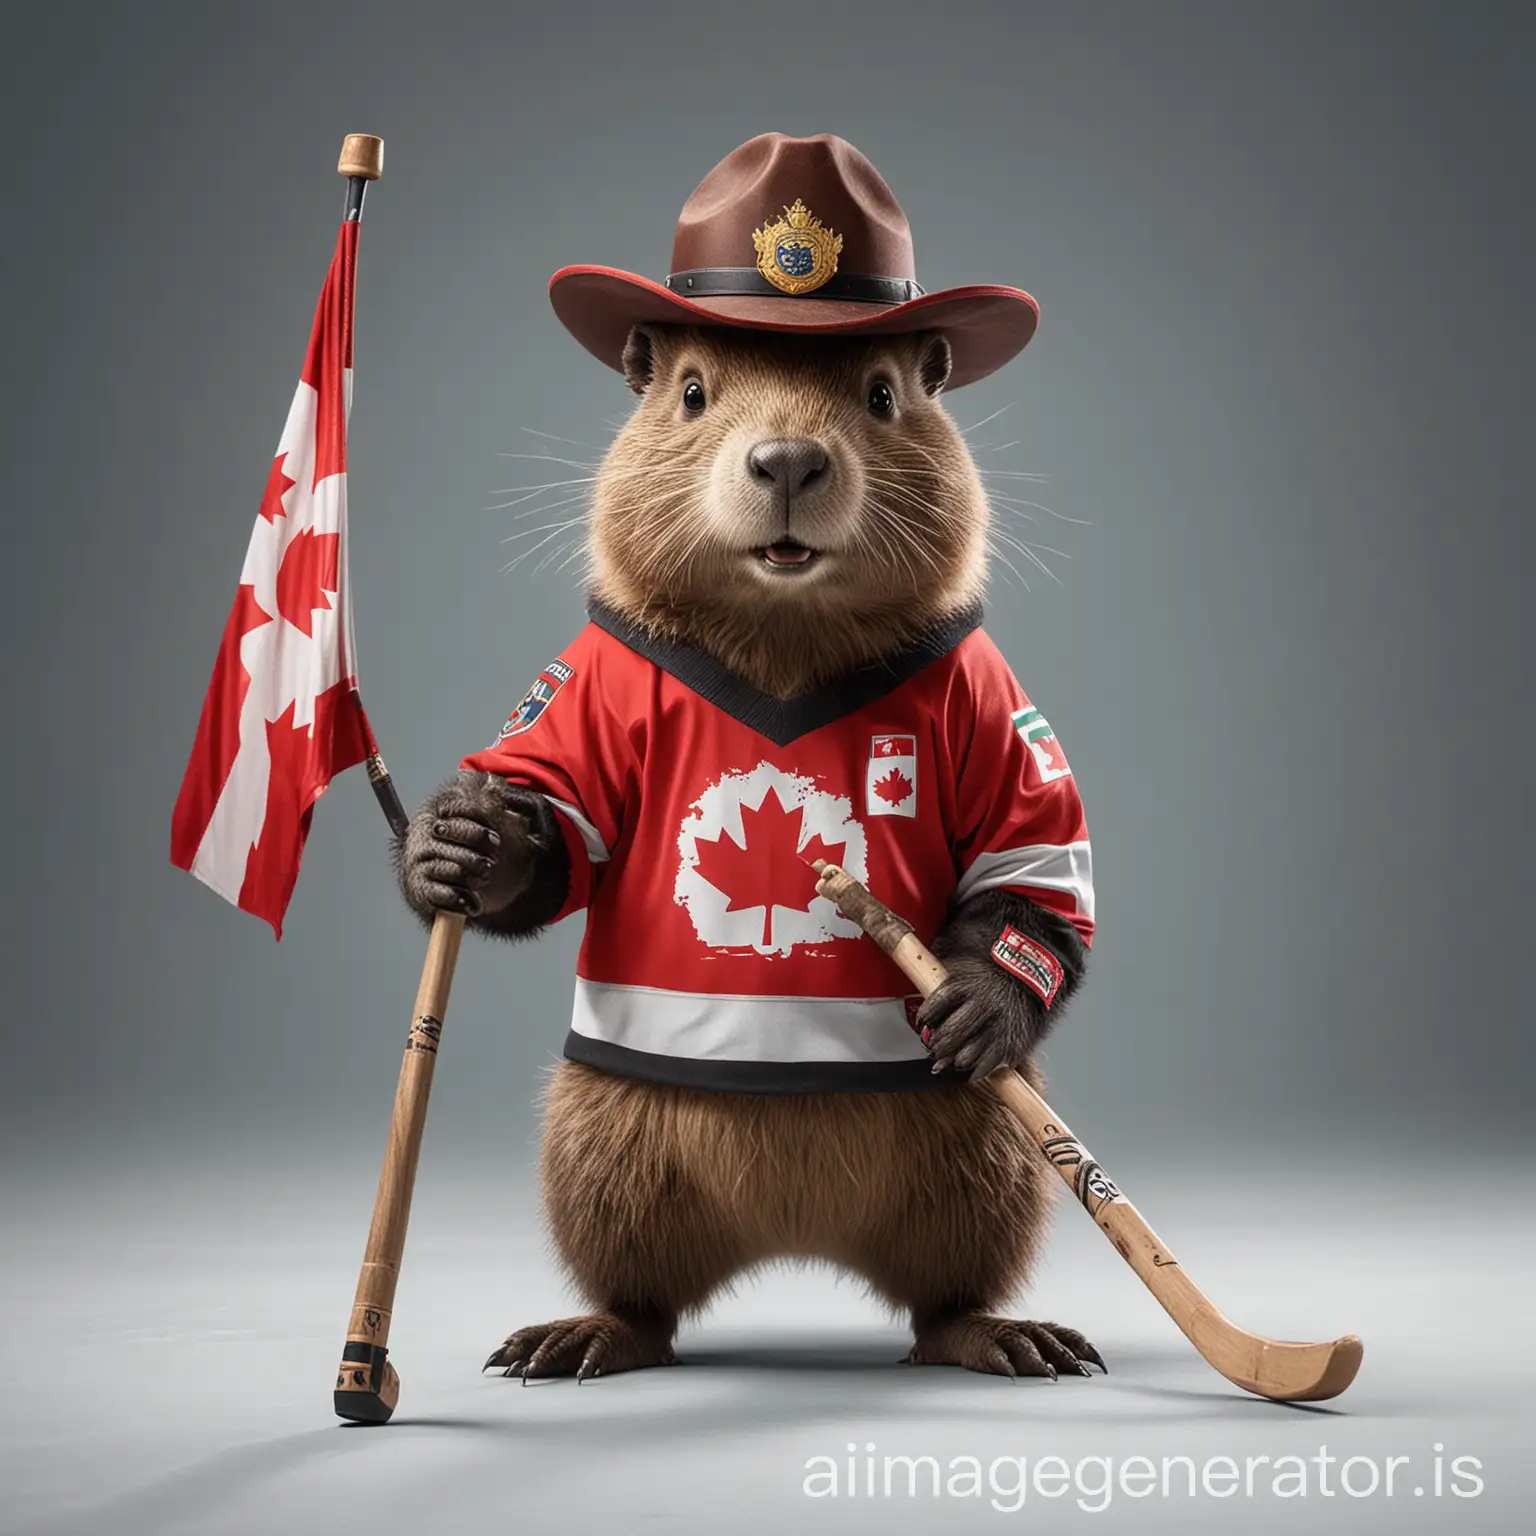 Canadian-Beaver-in-Hockey-Jersey-and-Mounted-Police-Hat-with-Canadian-Flag